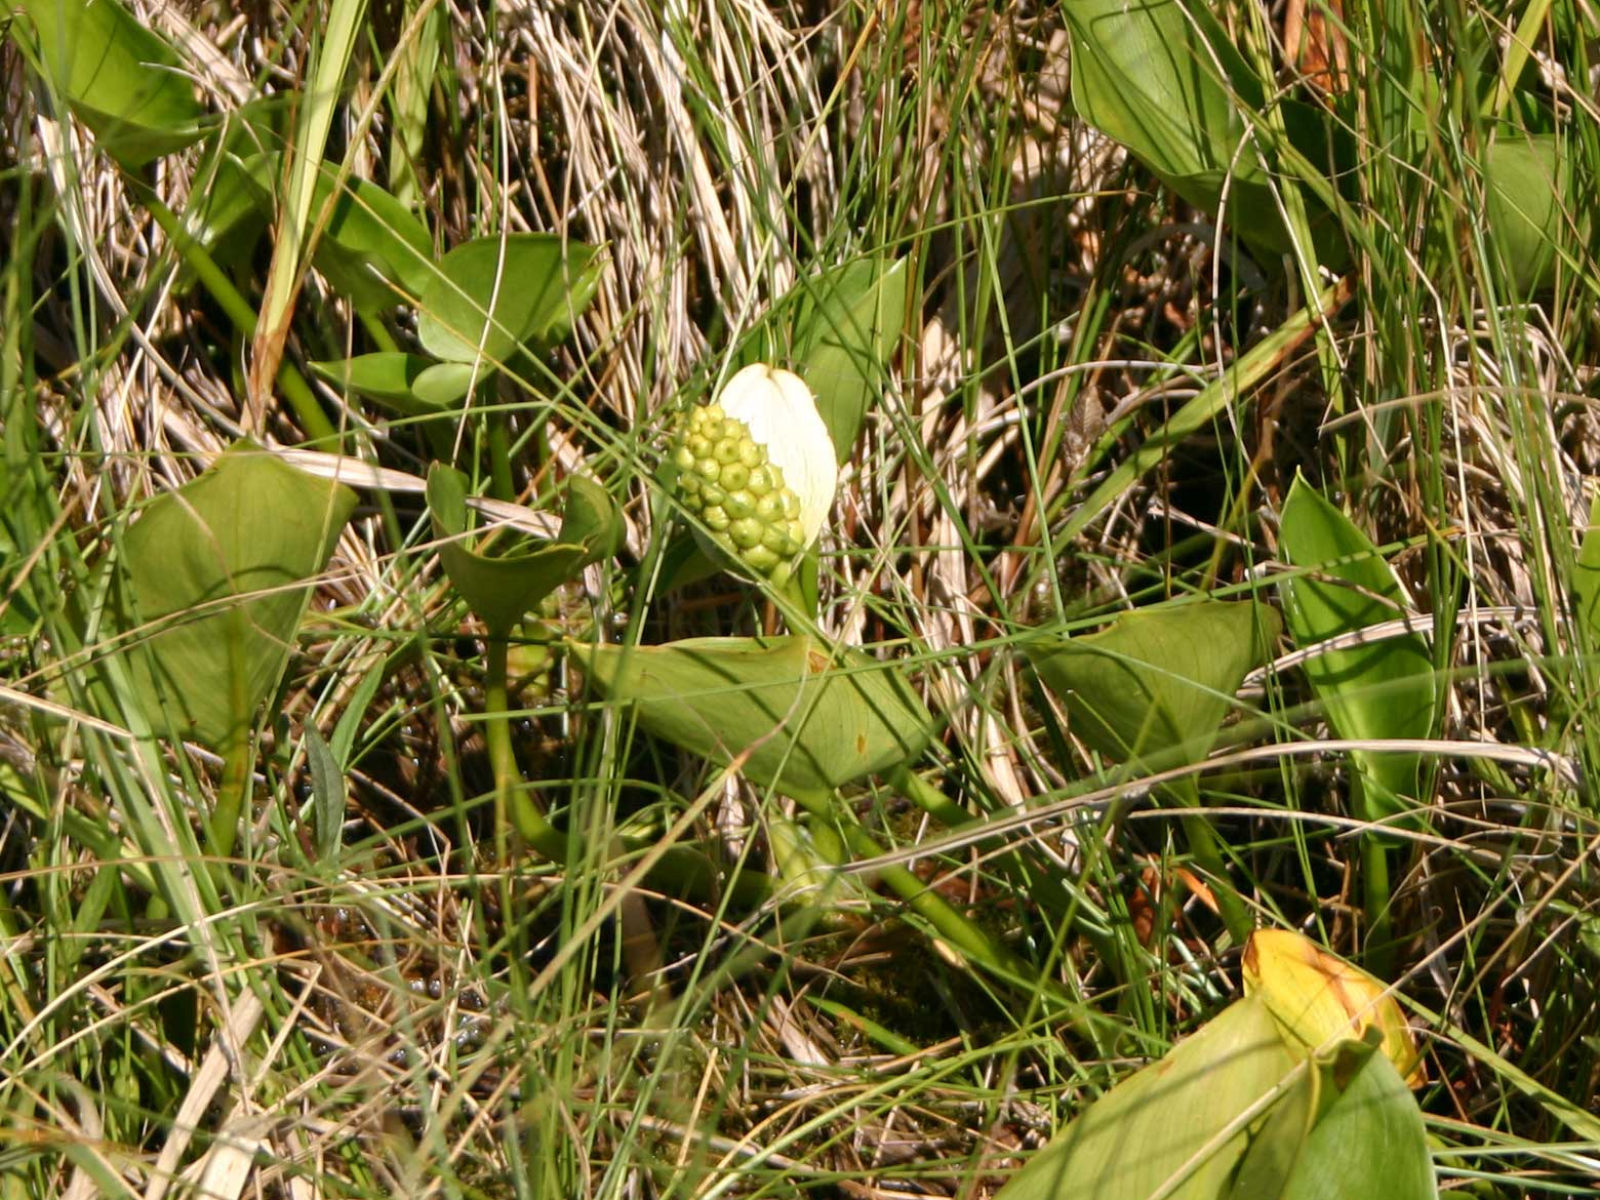 Close-up of a small white water calla bloom among grass.